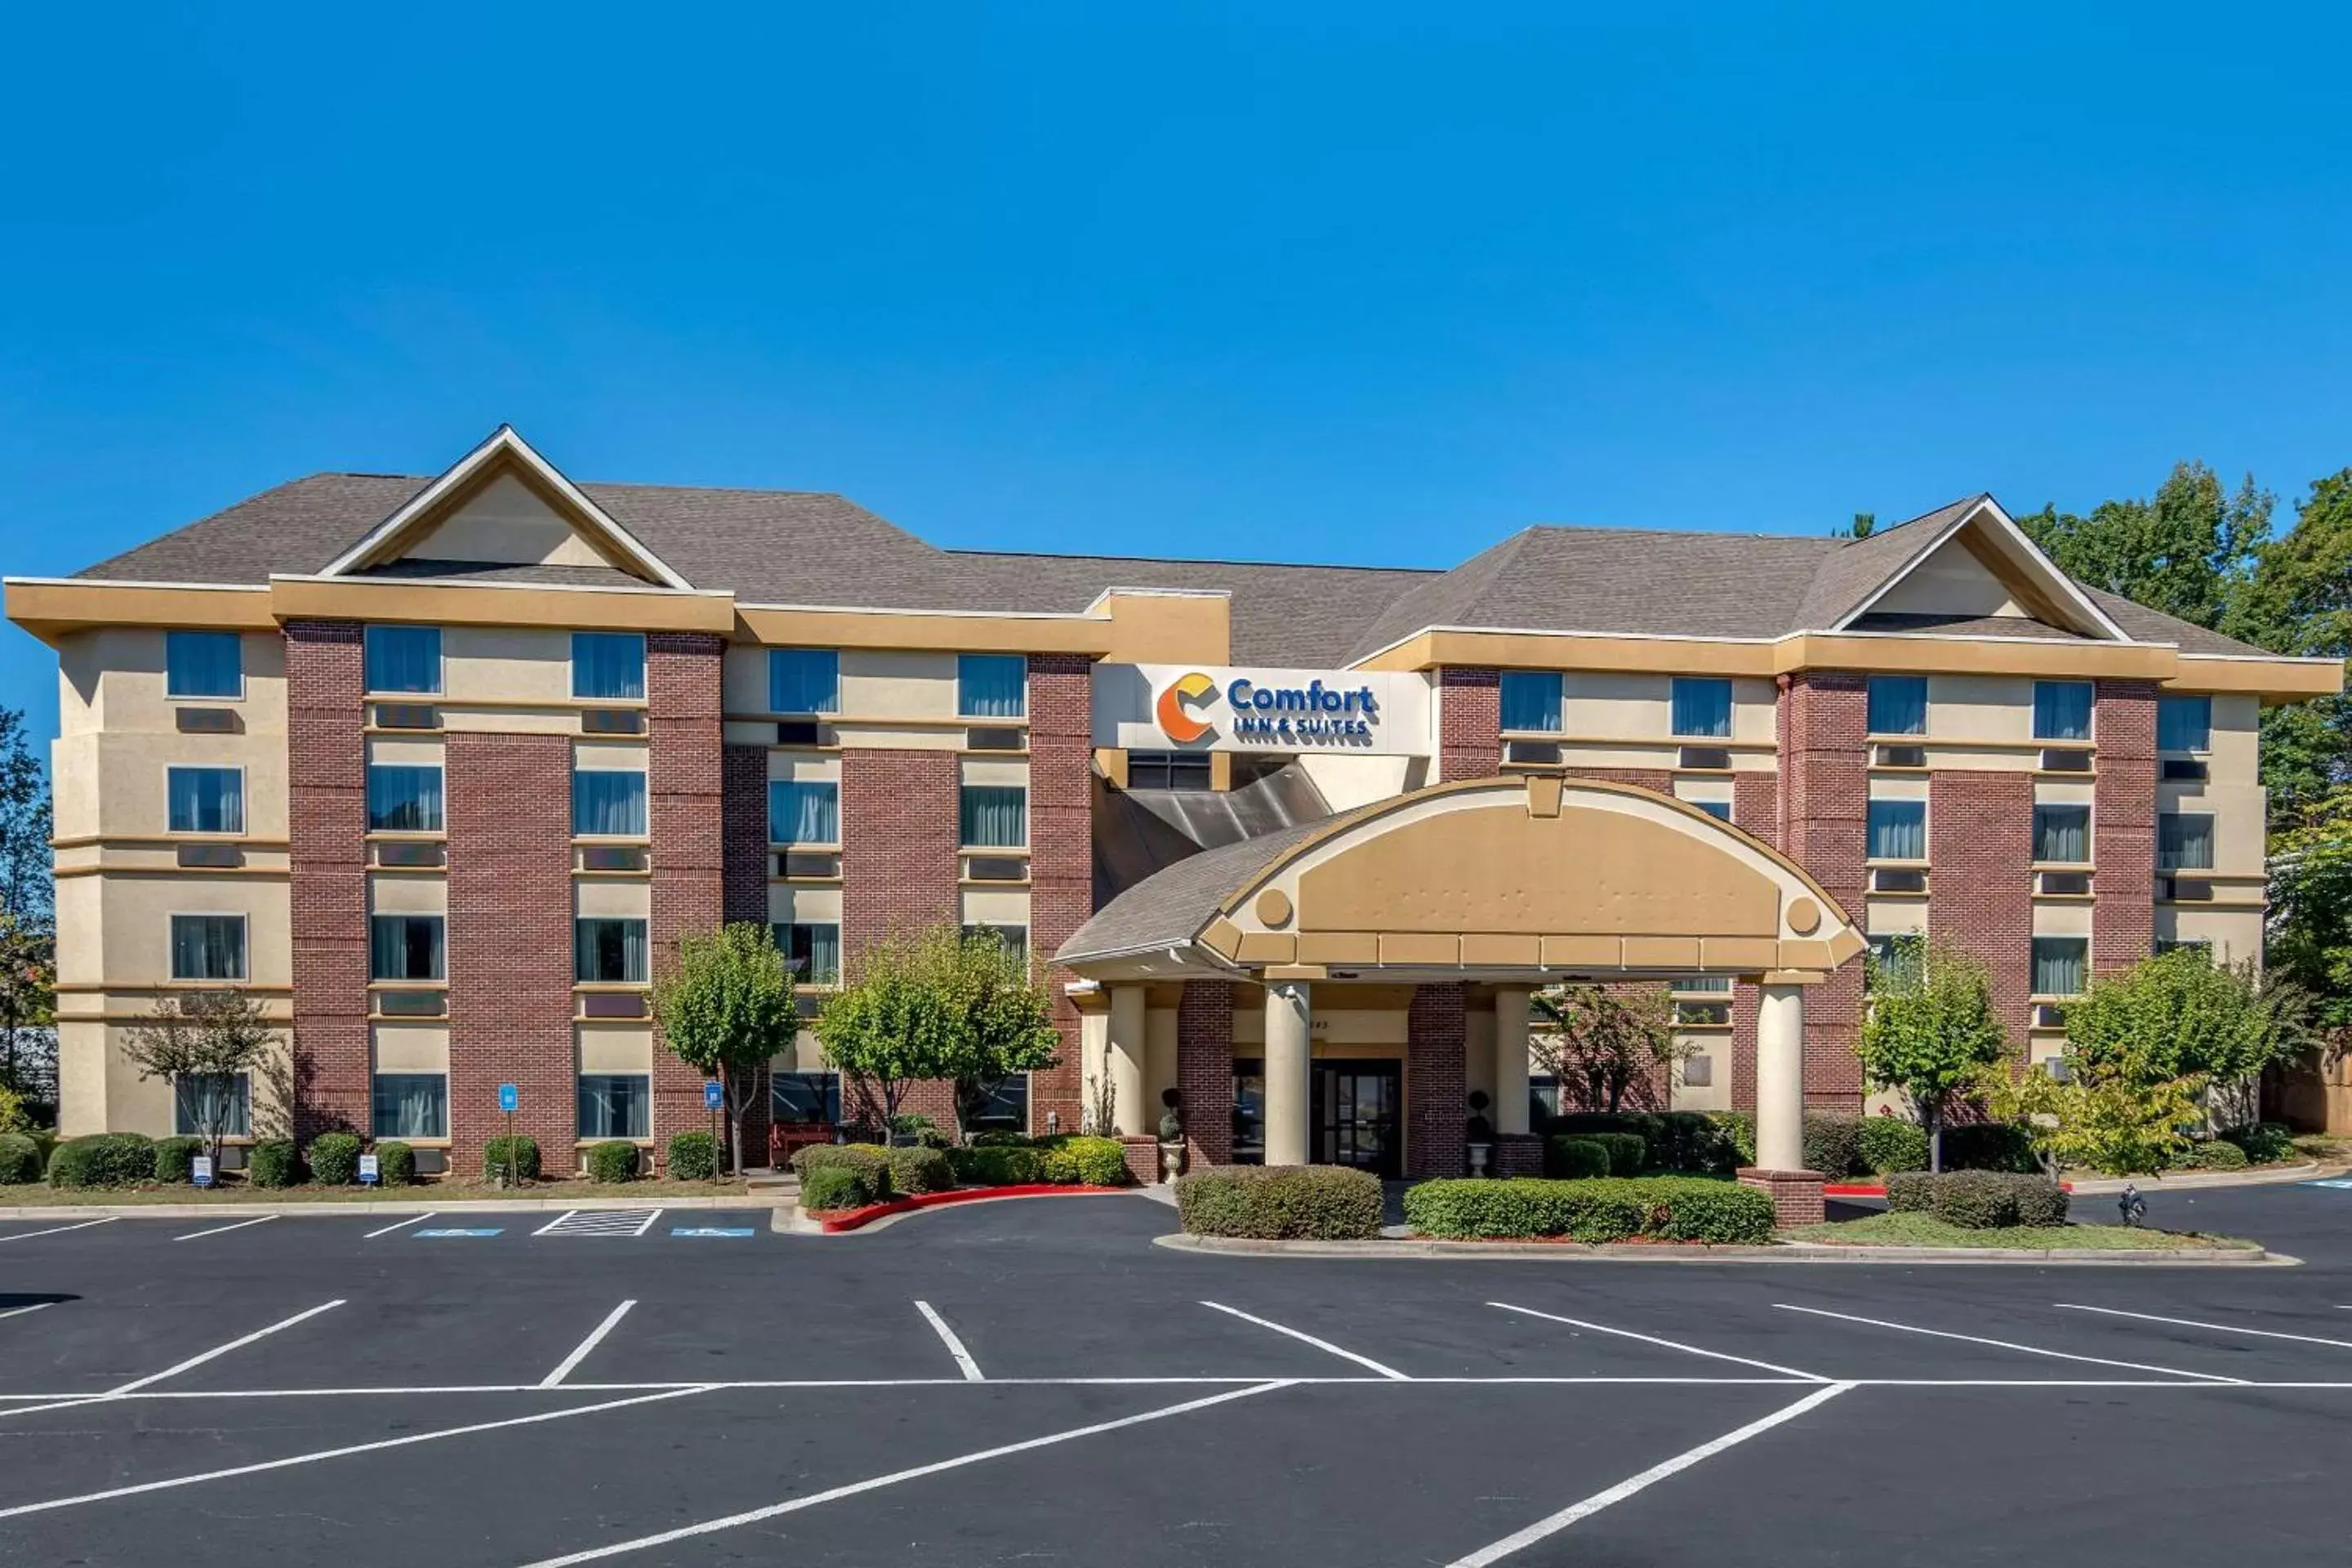 Property Building in Comfort Inn and Suites